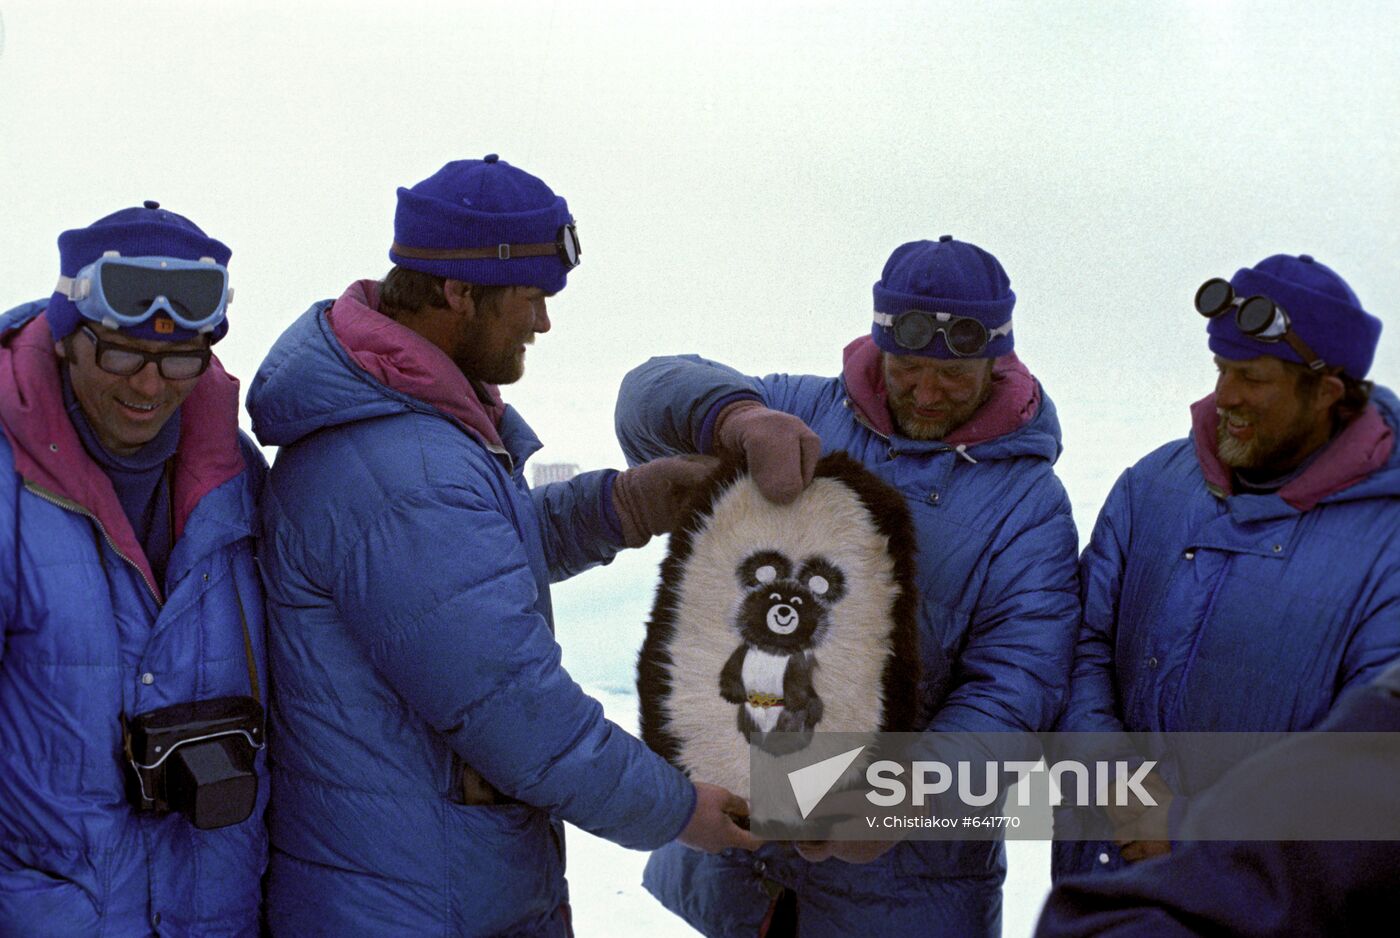 Expeditionists receiving souvenirs at the North Pole